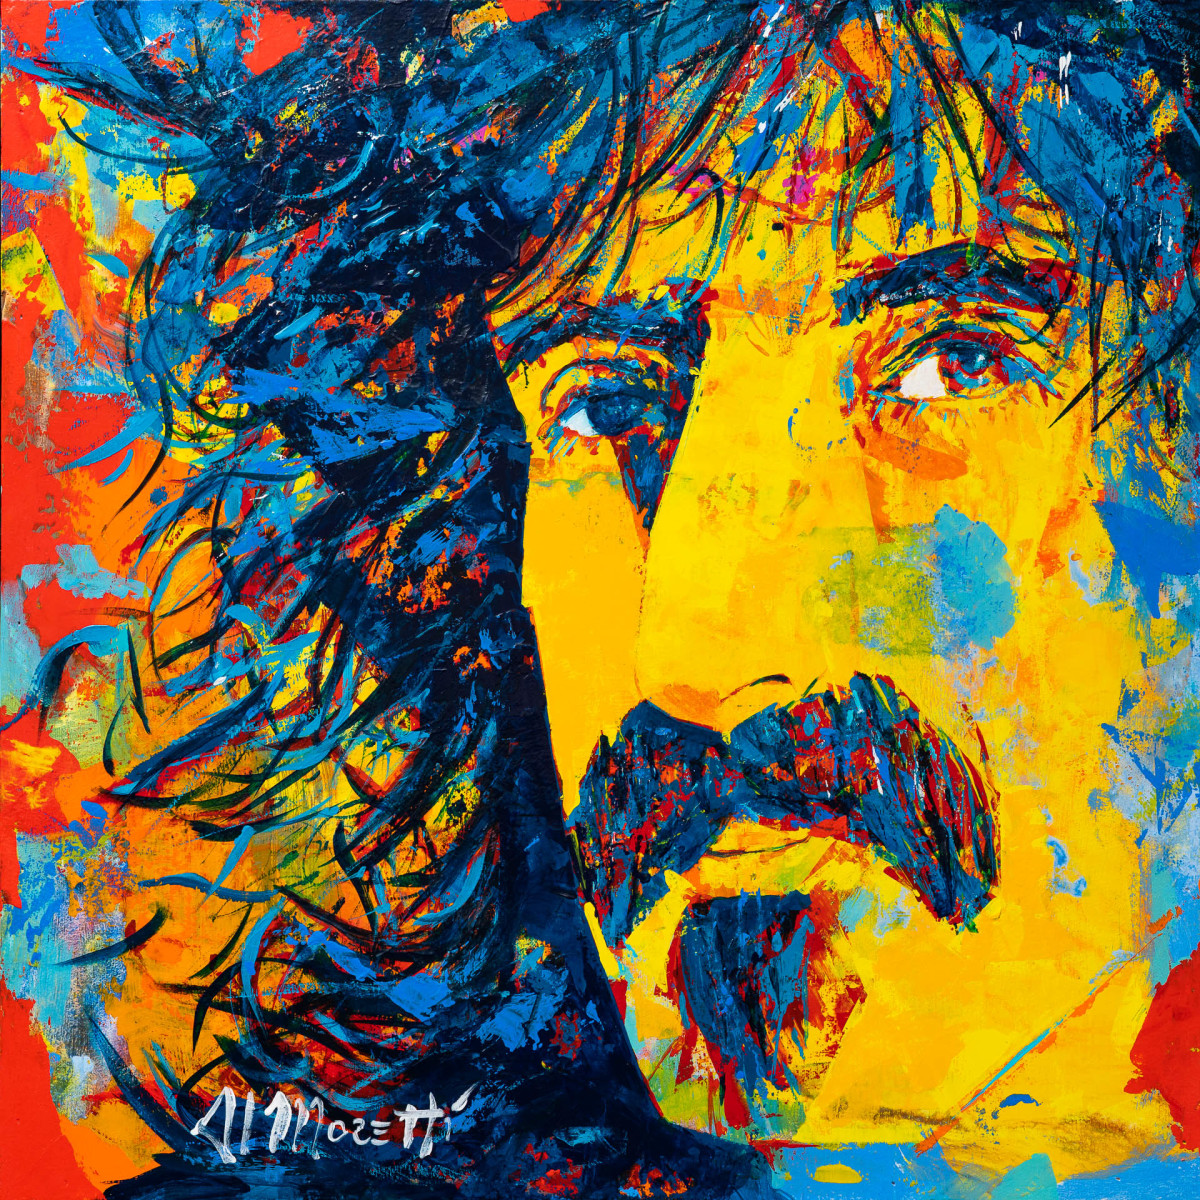 Frank Zappa, "The Mother of Invention" by Al Moretti 